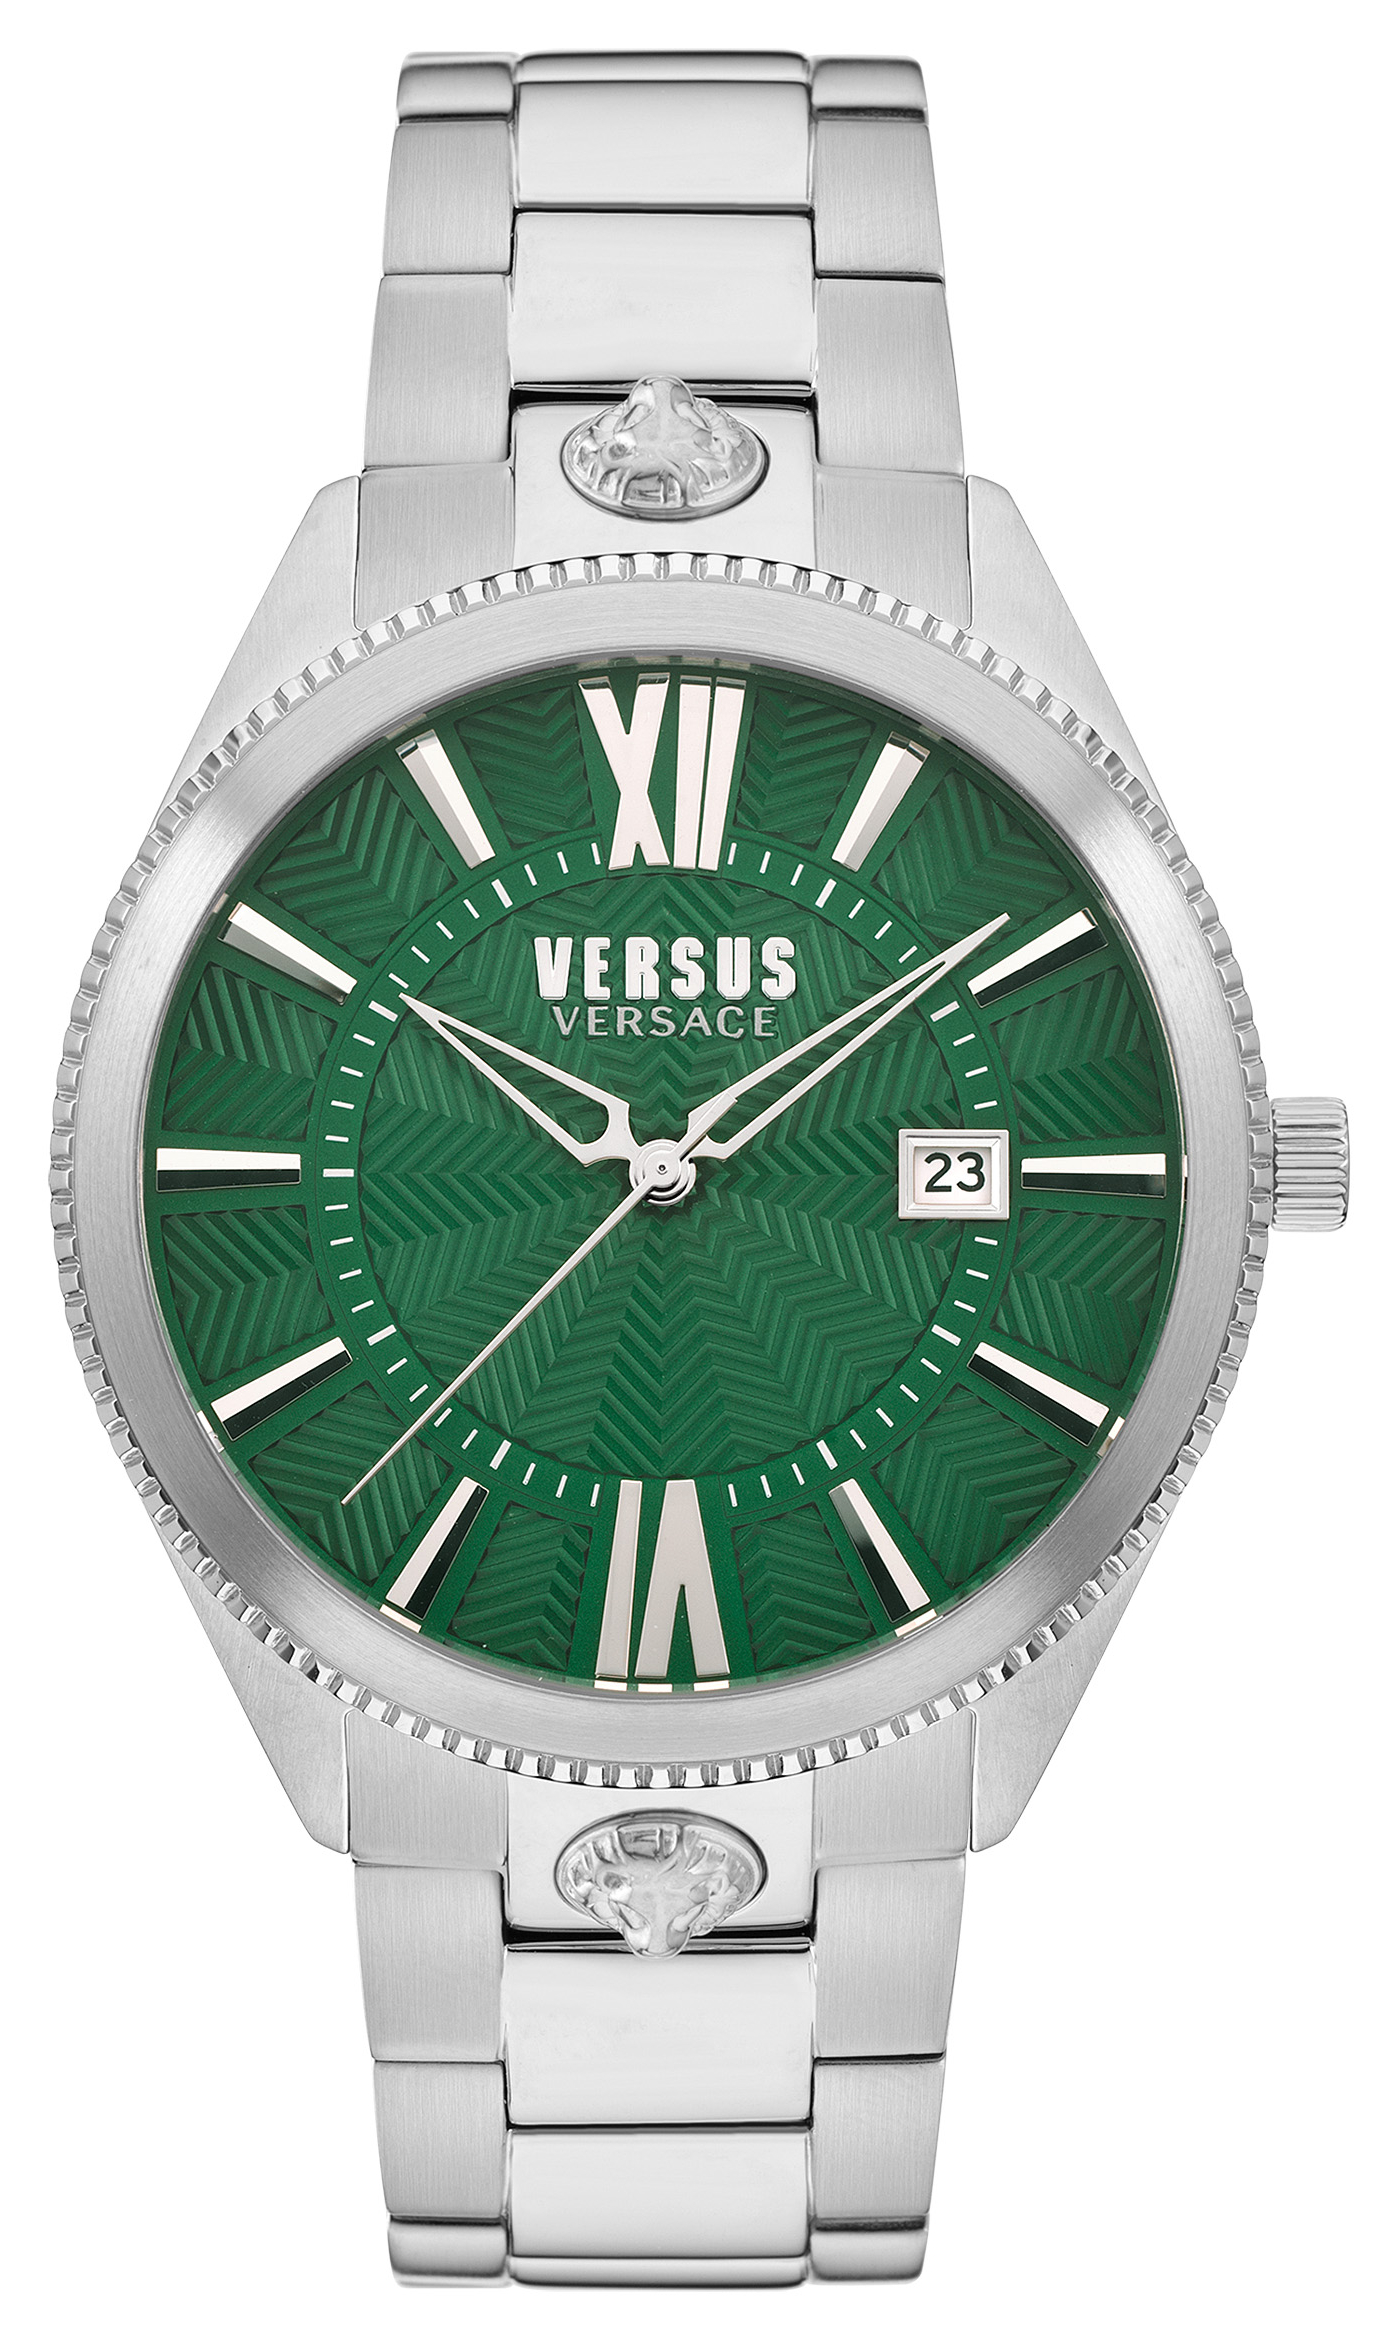 All New Unmissable Men's Fashion Watches - First Class Watches Blog